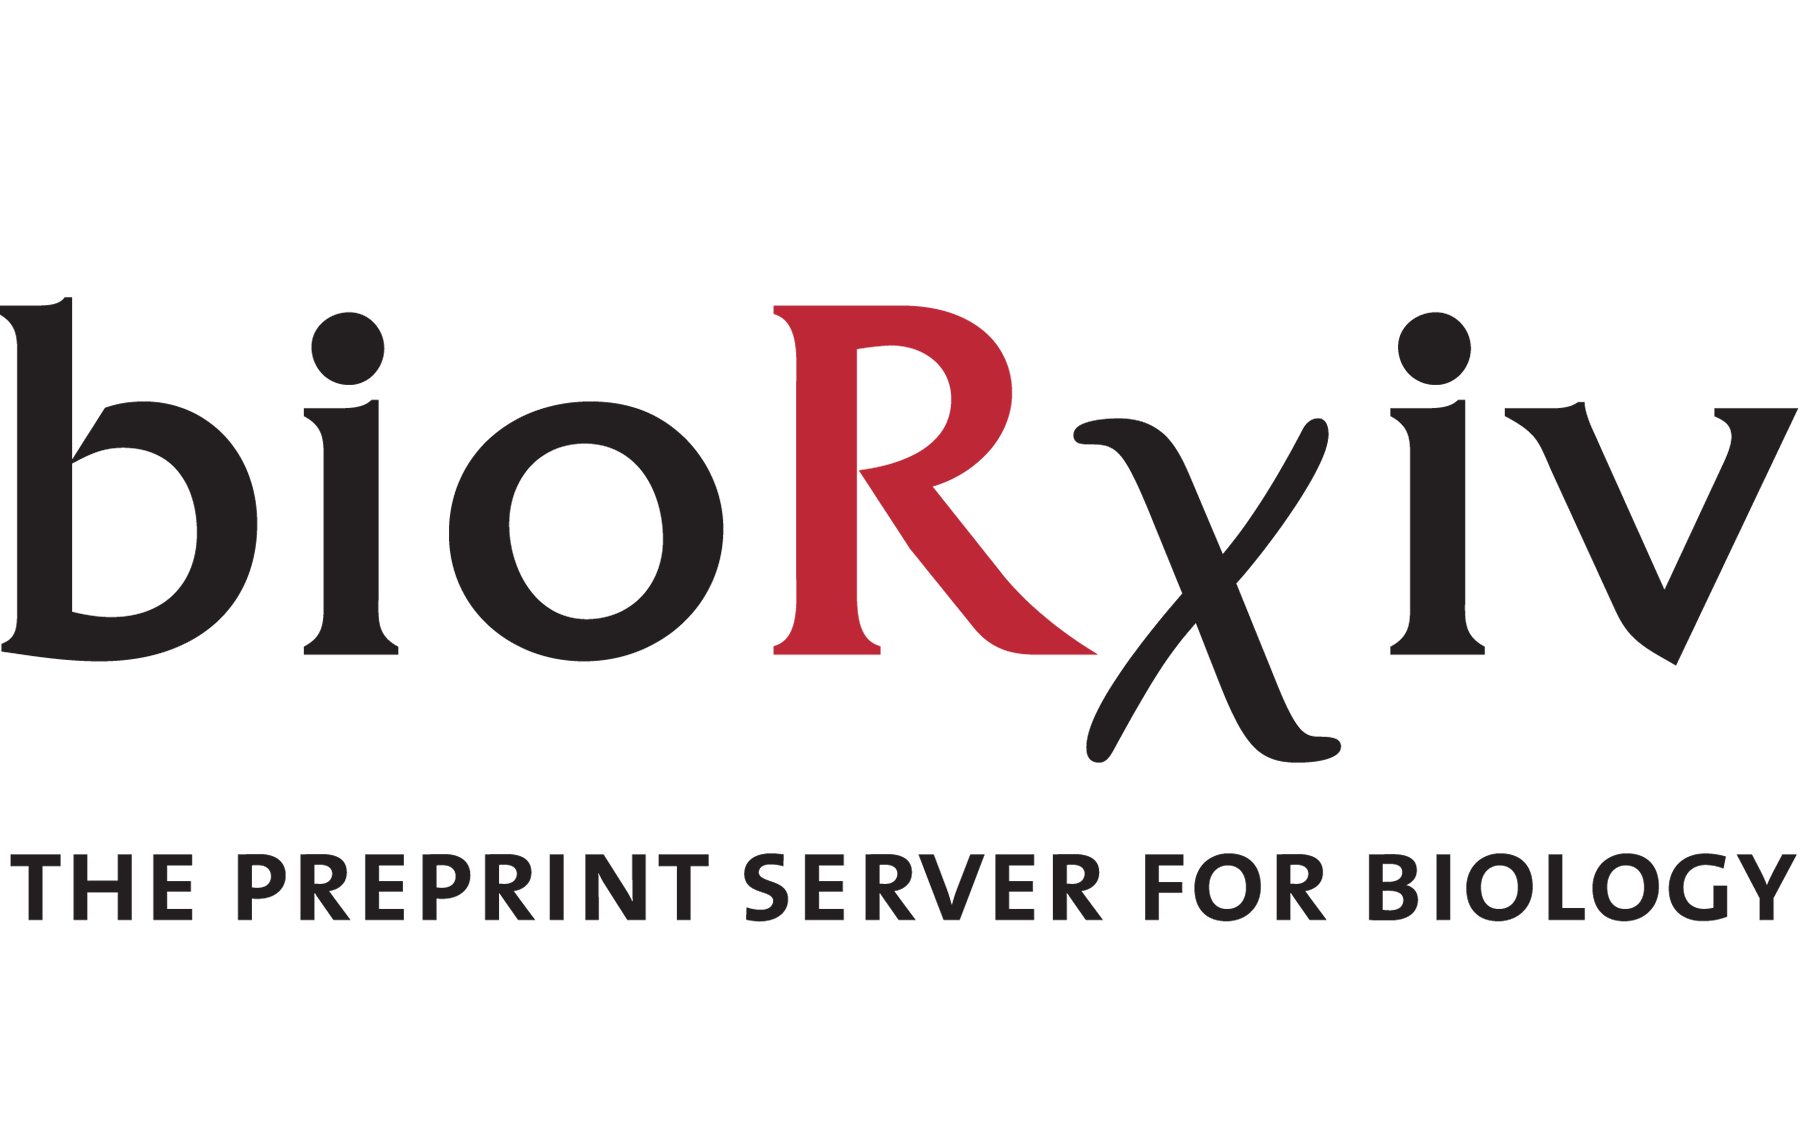 The next lab preprint is available on bioRxiv